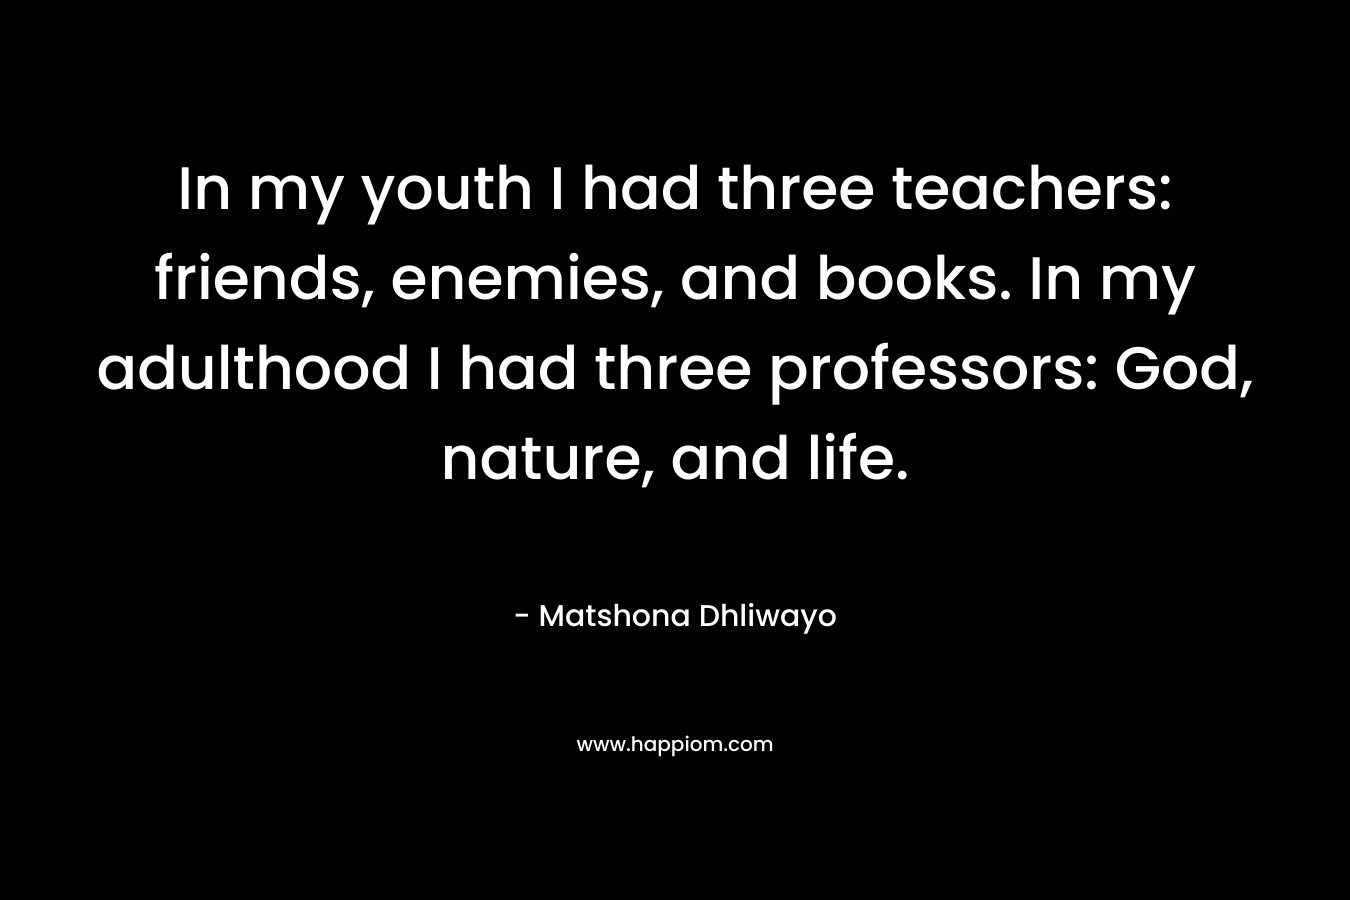 In my youth I had three teachers: friends, enemies, and books. In my adulthood I had three professors: God, nature, and life.